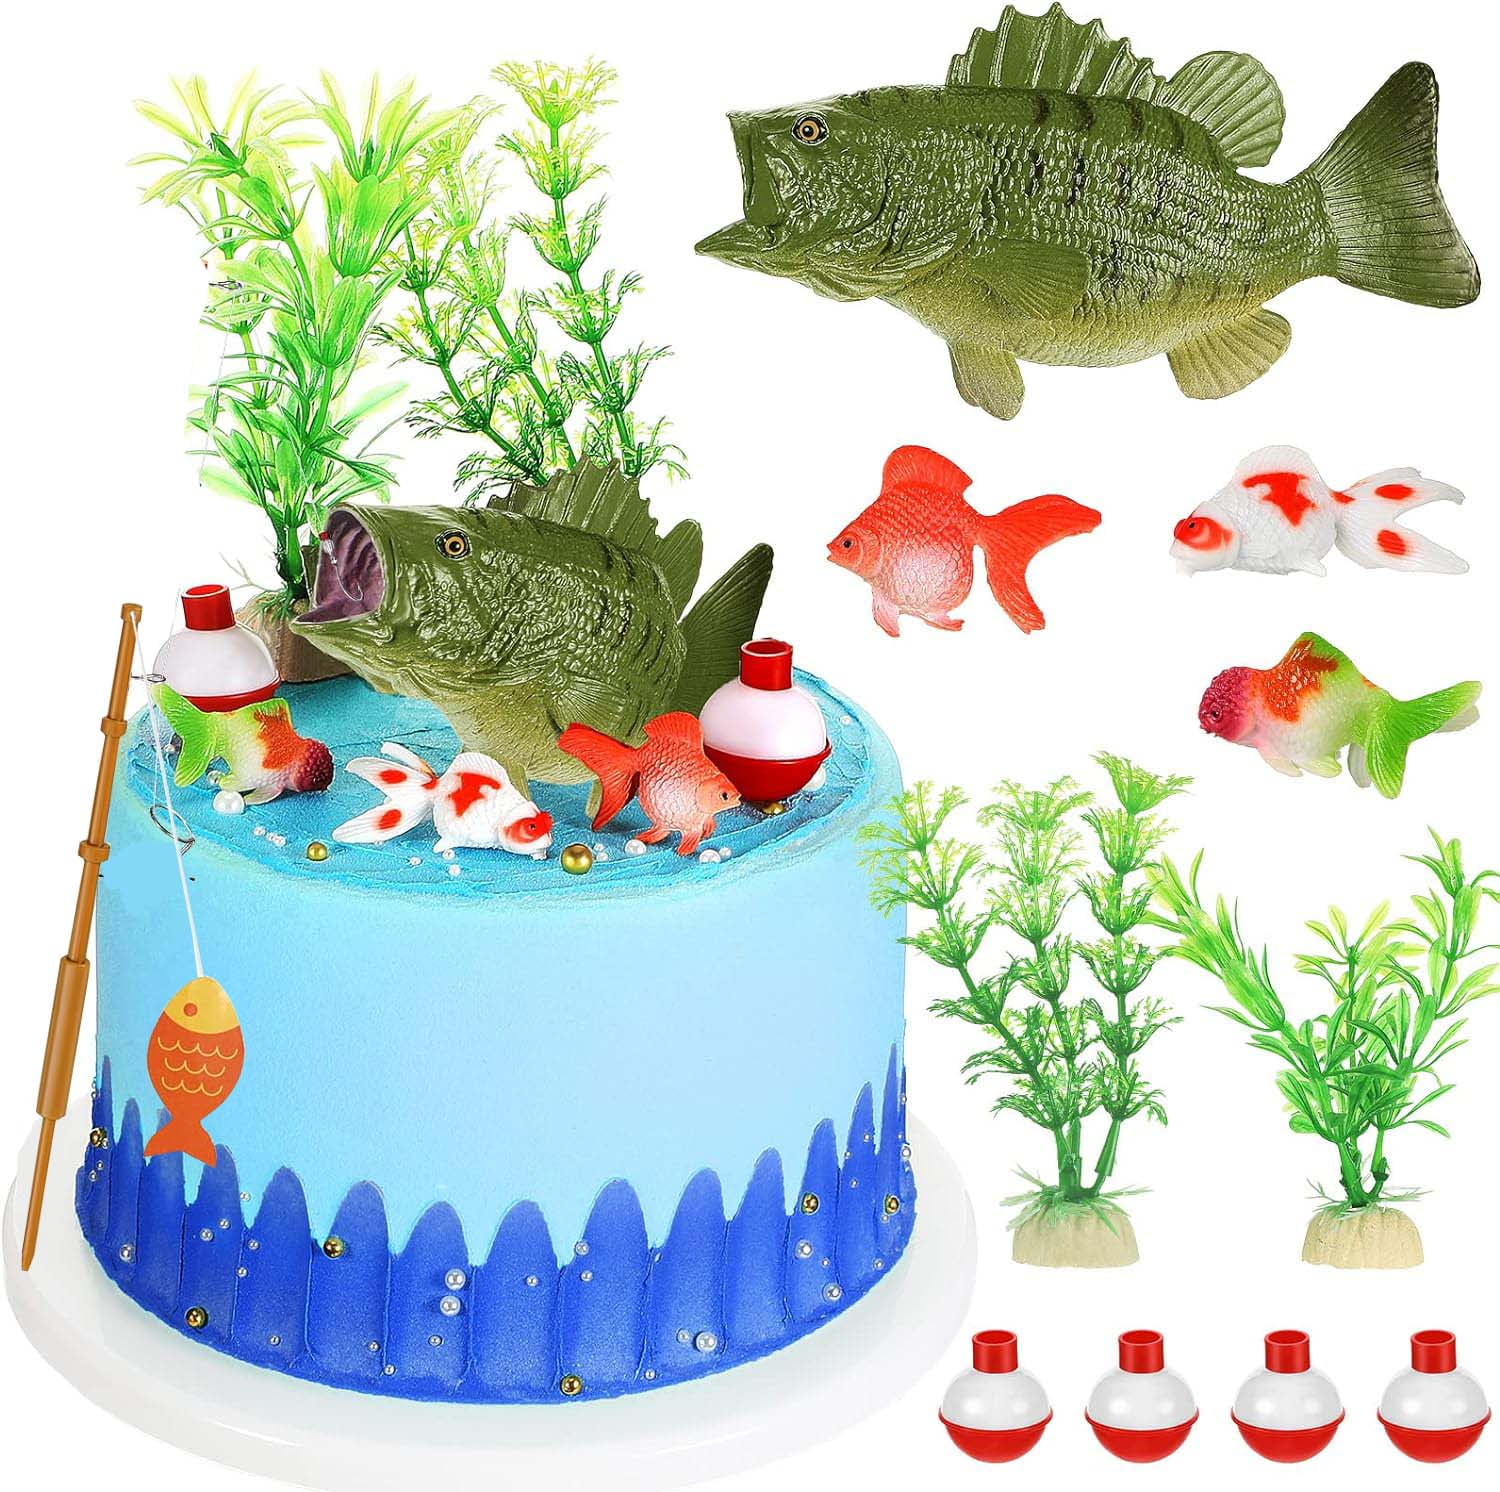 SHAMI The Big One GO fishing Cake Topper- One Cake Topper for